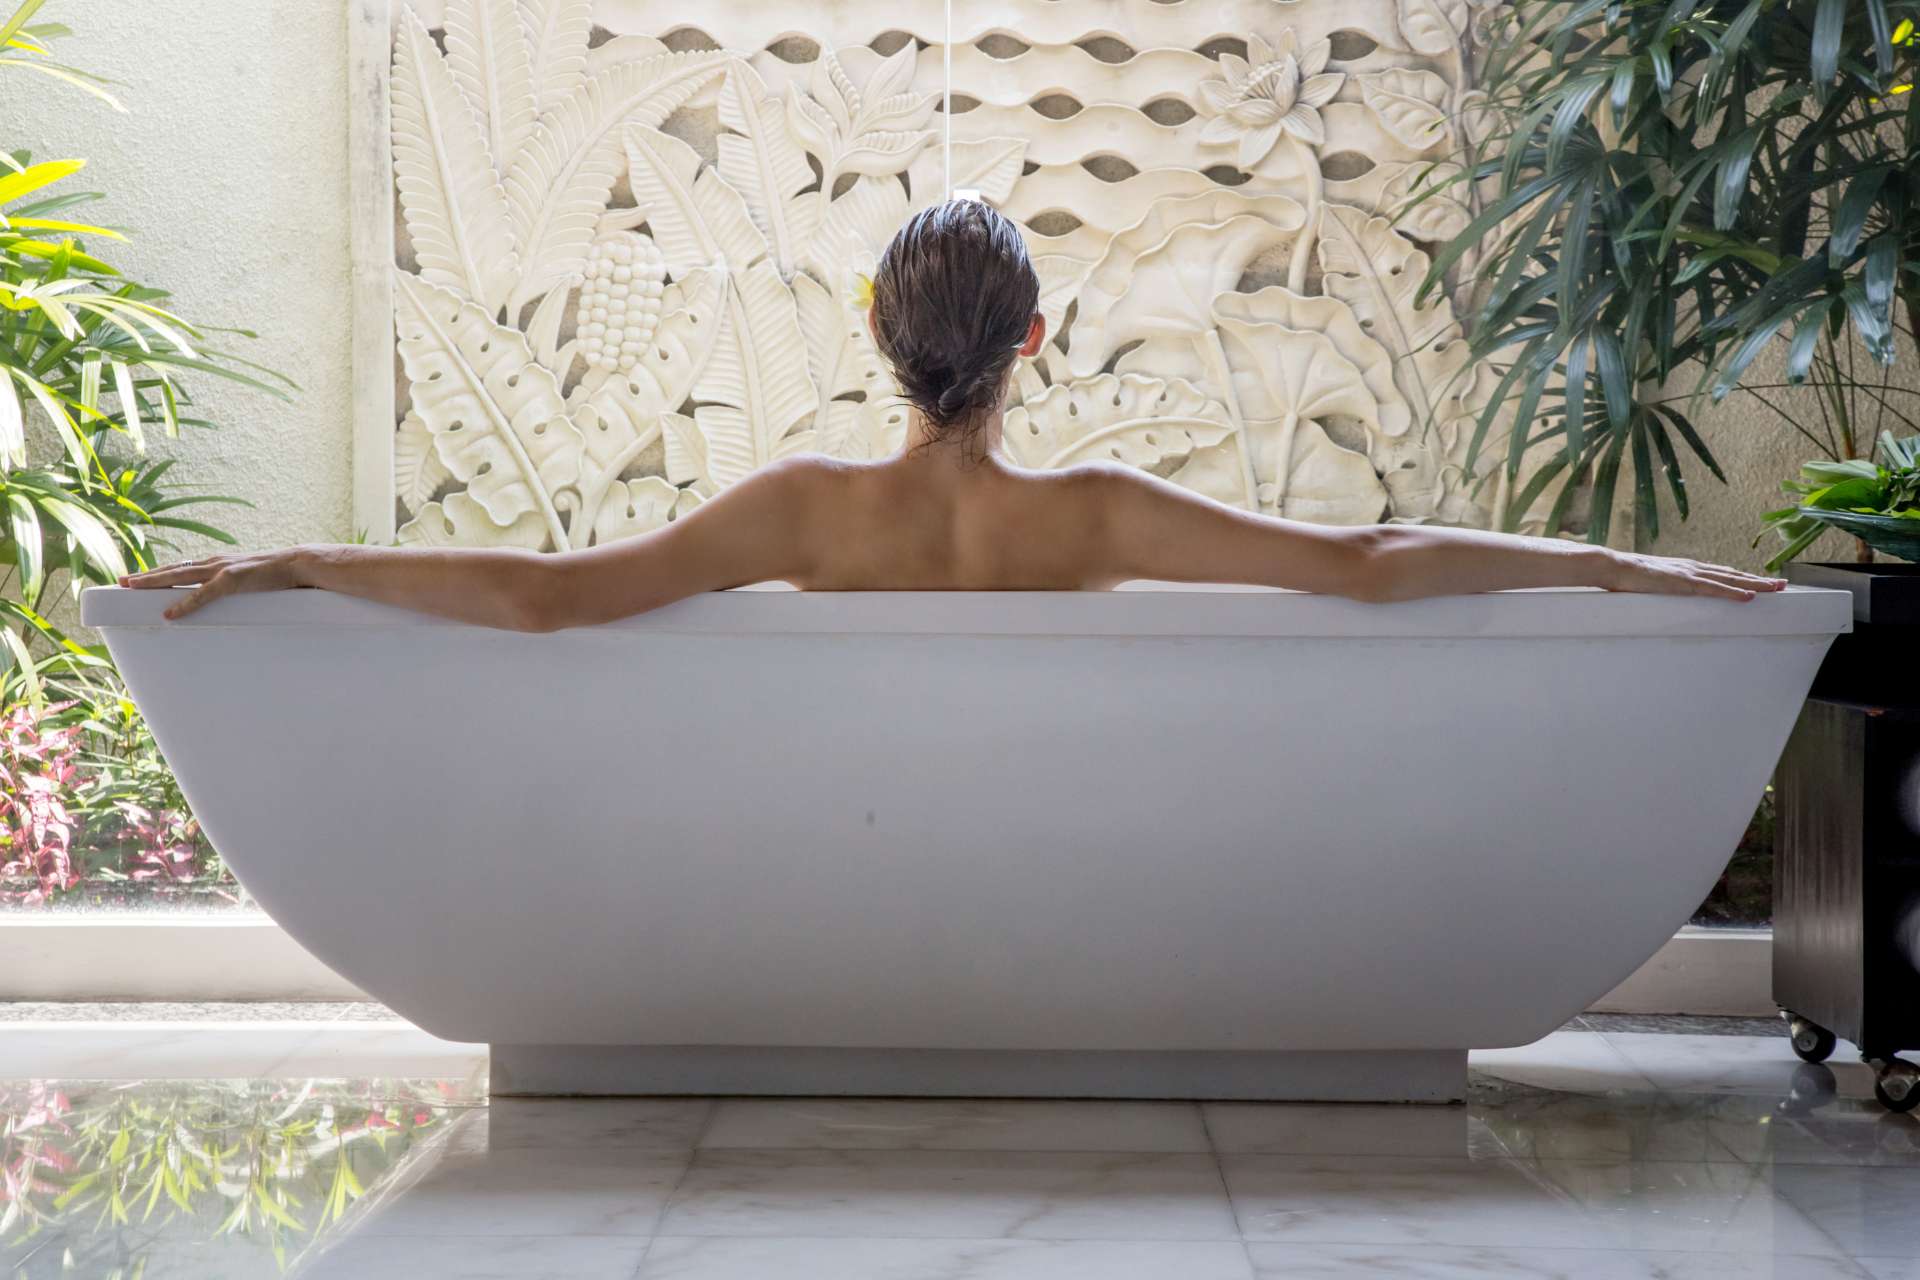 Portrait of a person relaxing in the bathtub ©Getty Images